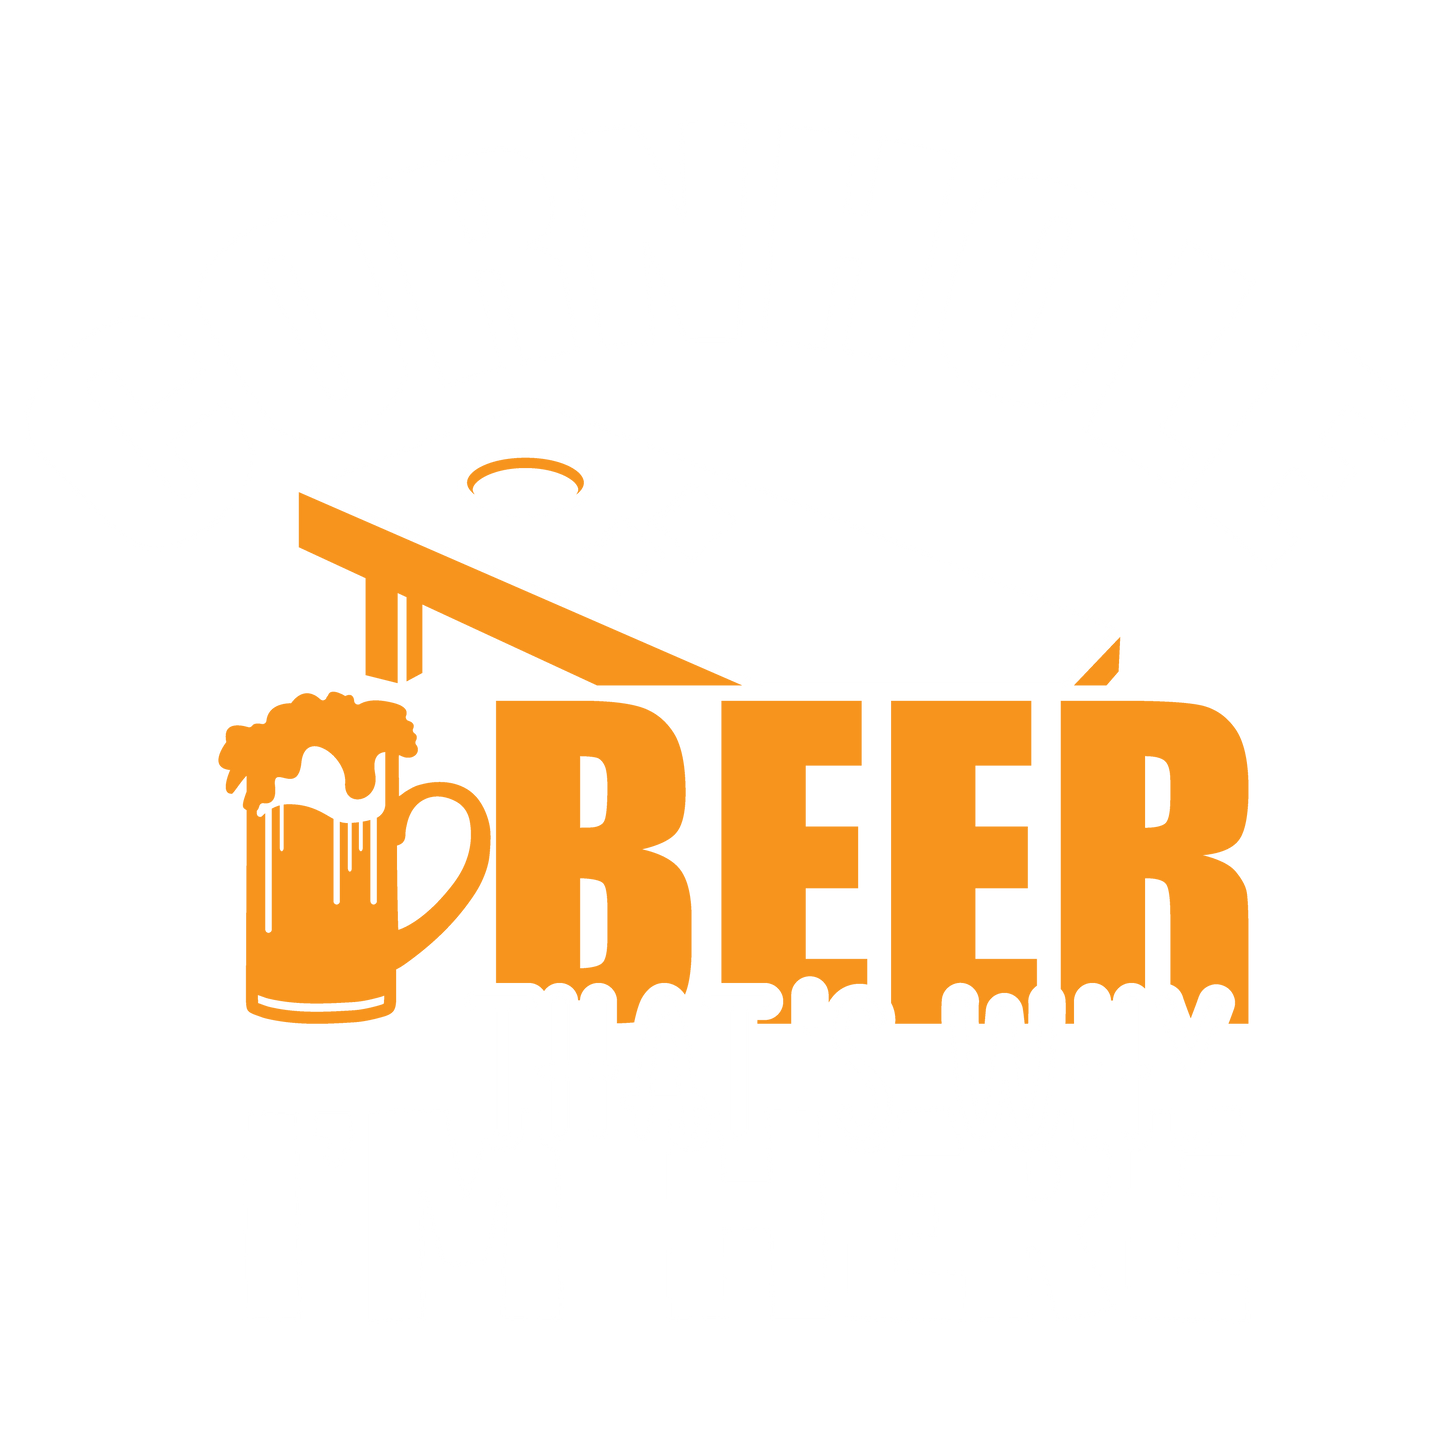 Funny T-Shirts design "Cornhole Beer, That’s Why I am here"